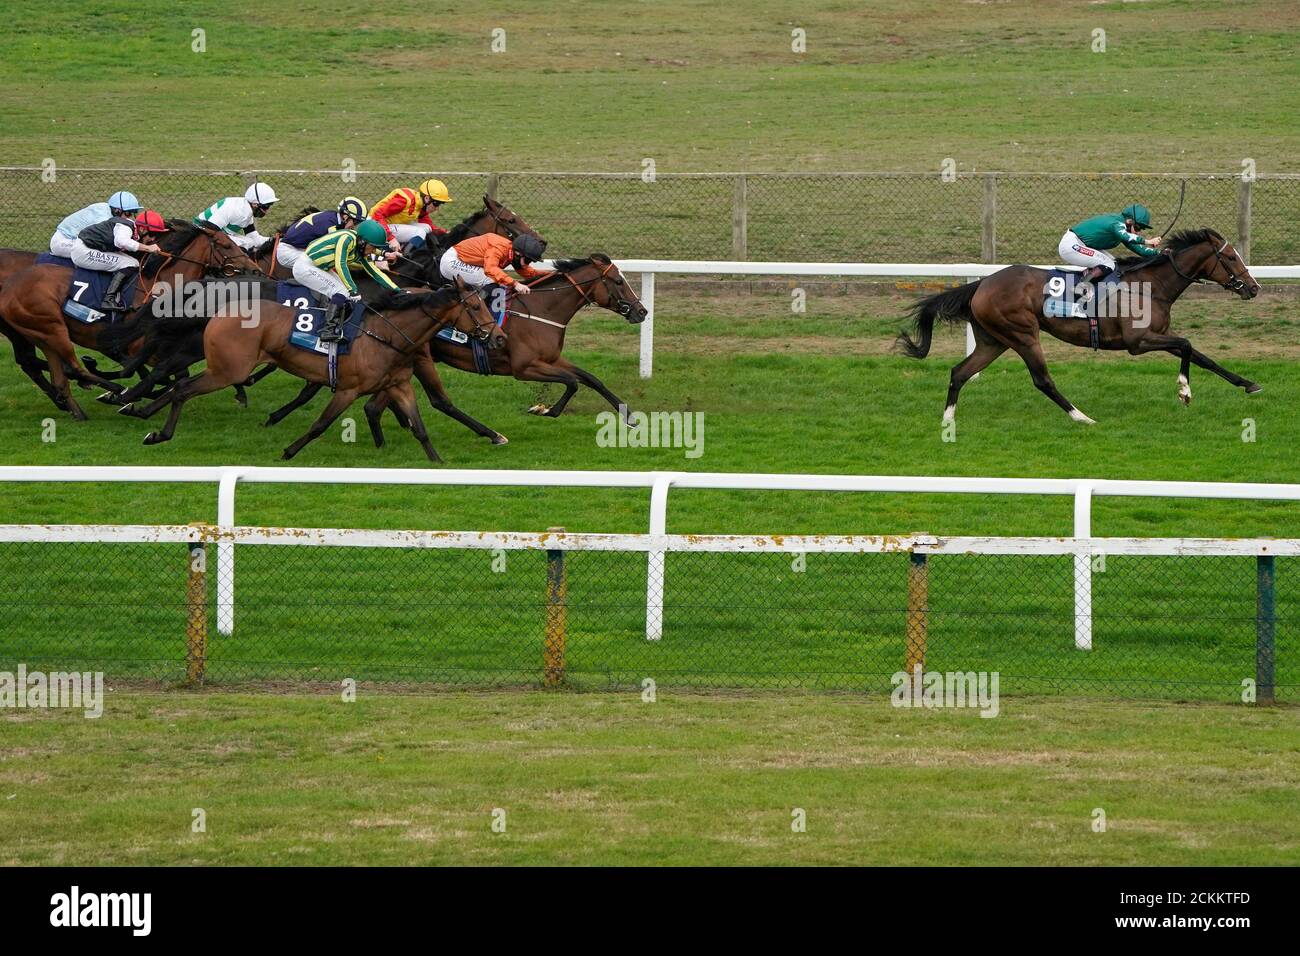 Hollie Doyle riding Majestic Noor (right, green) win The EBF Stallions John Musker Fillies' Stakes at Great Yarmouth Racecourse. Stock Photo